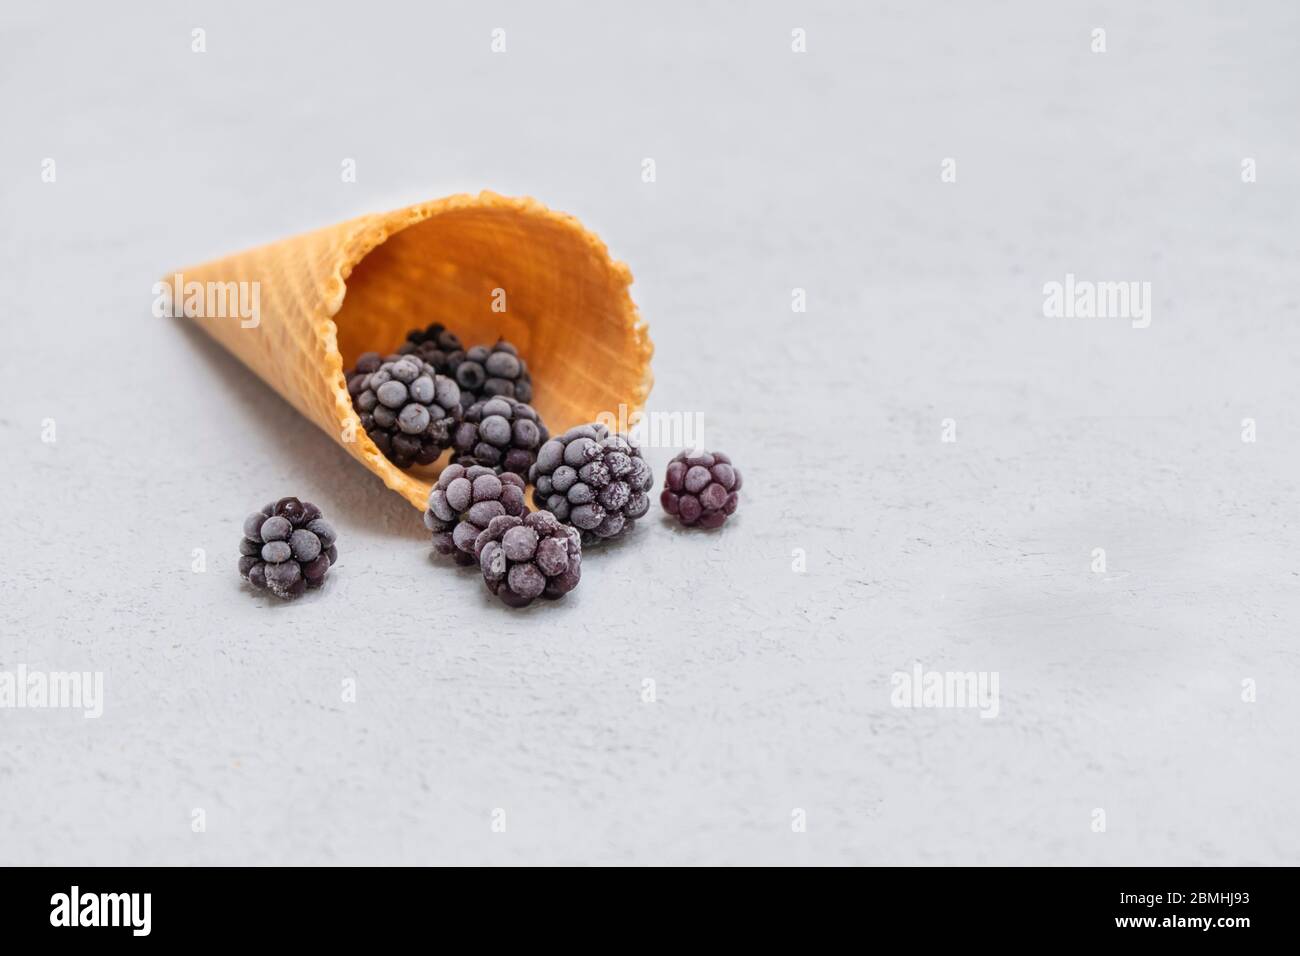 Frozen blackberries in a waffle cone on neutral background with space for text Stock Photo